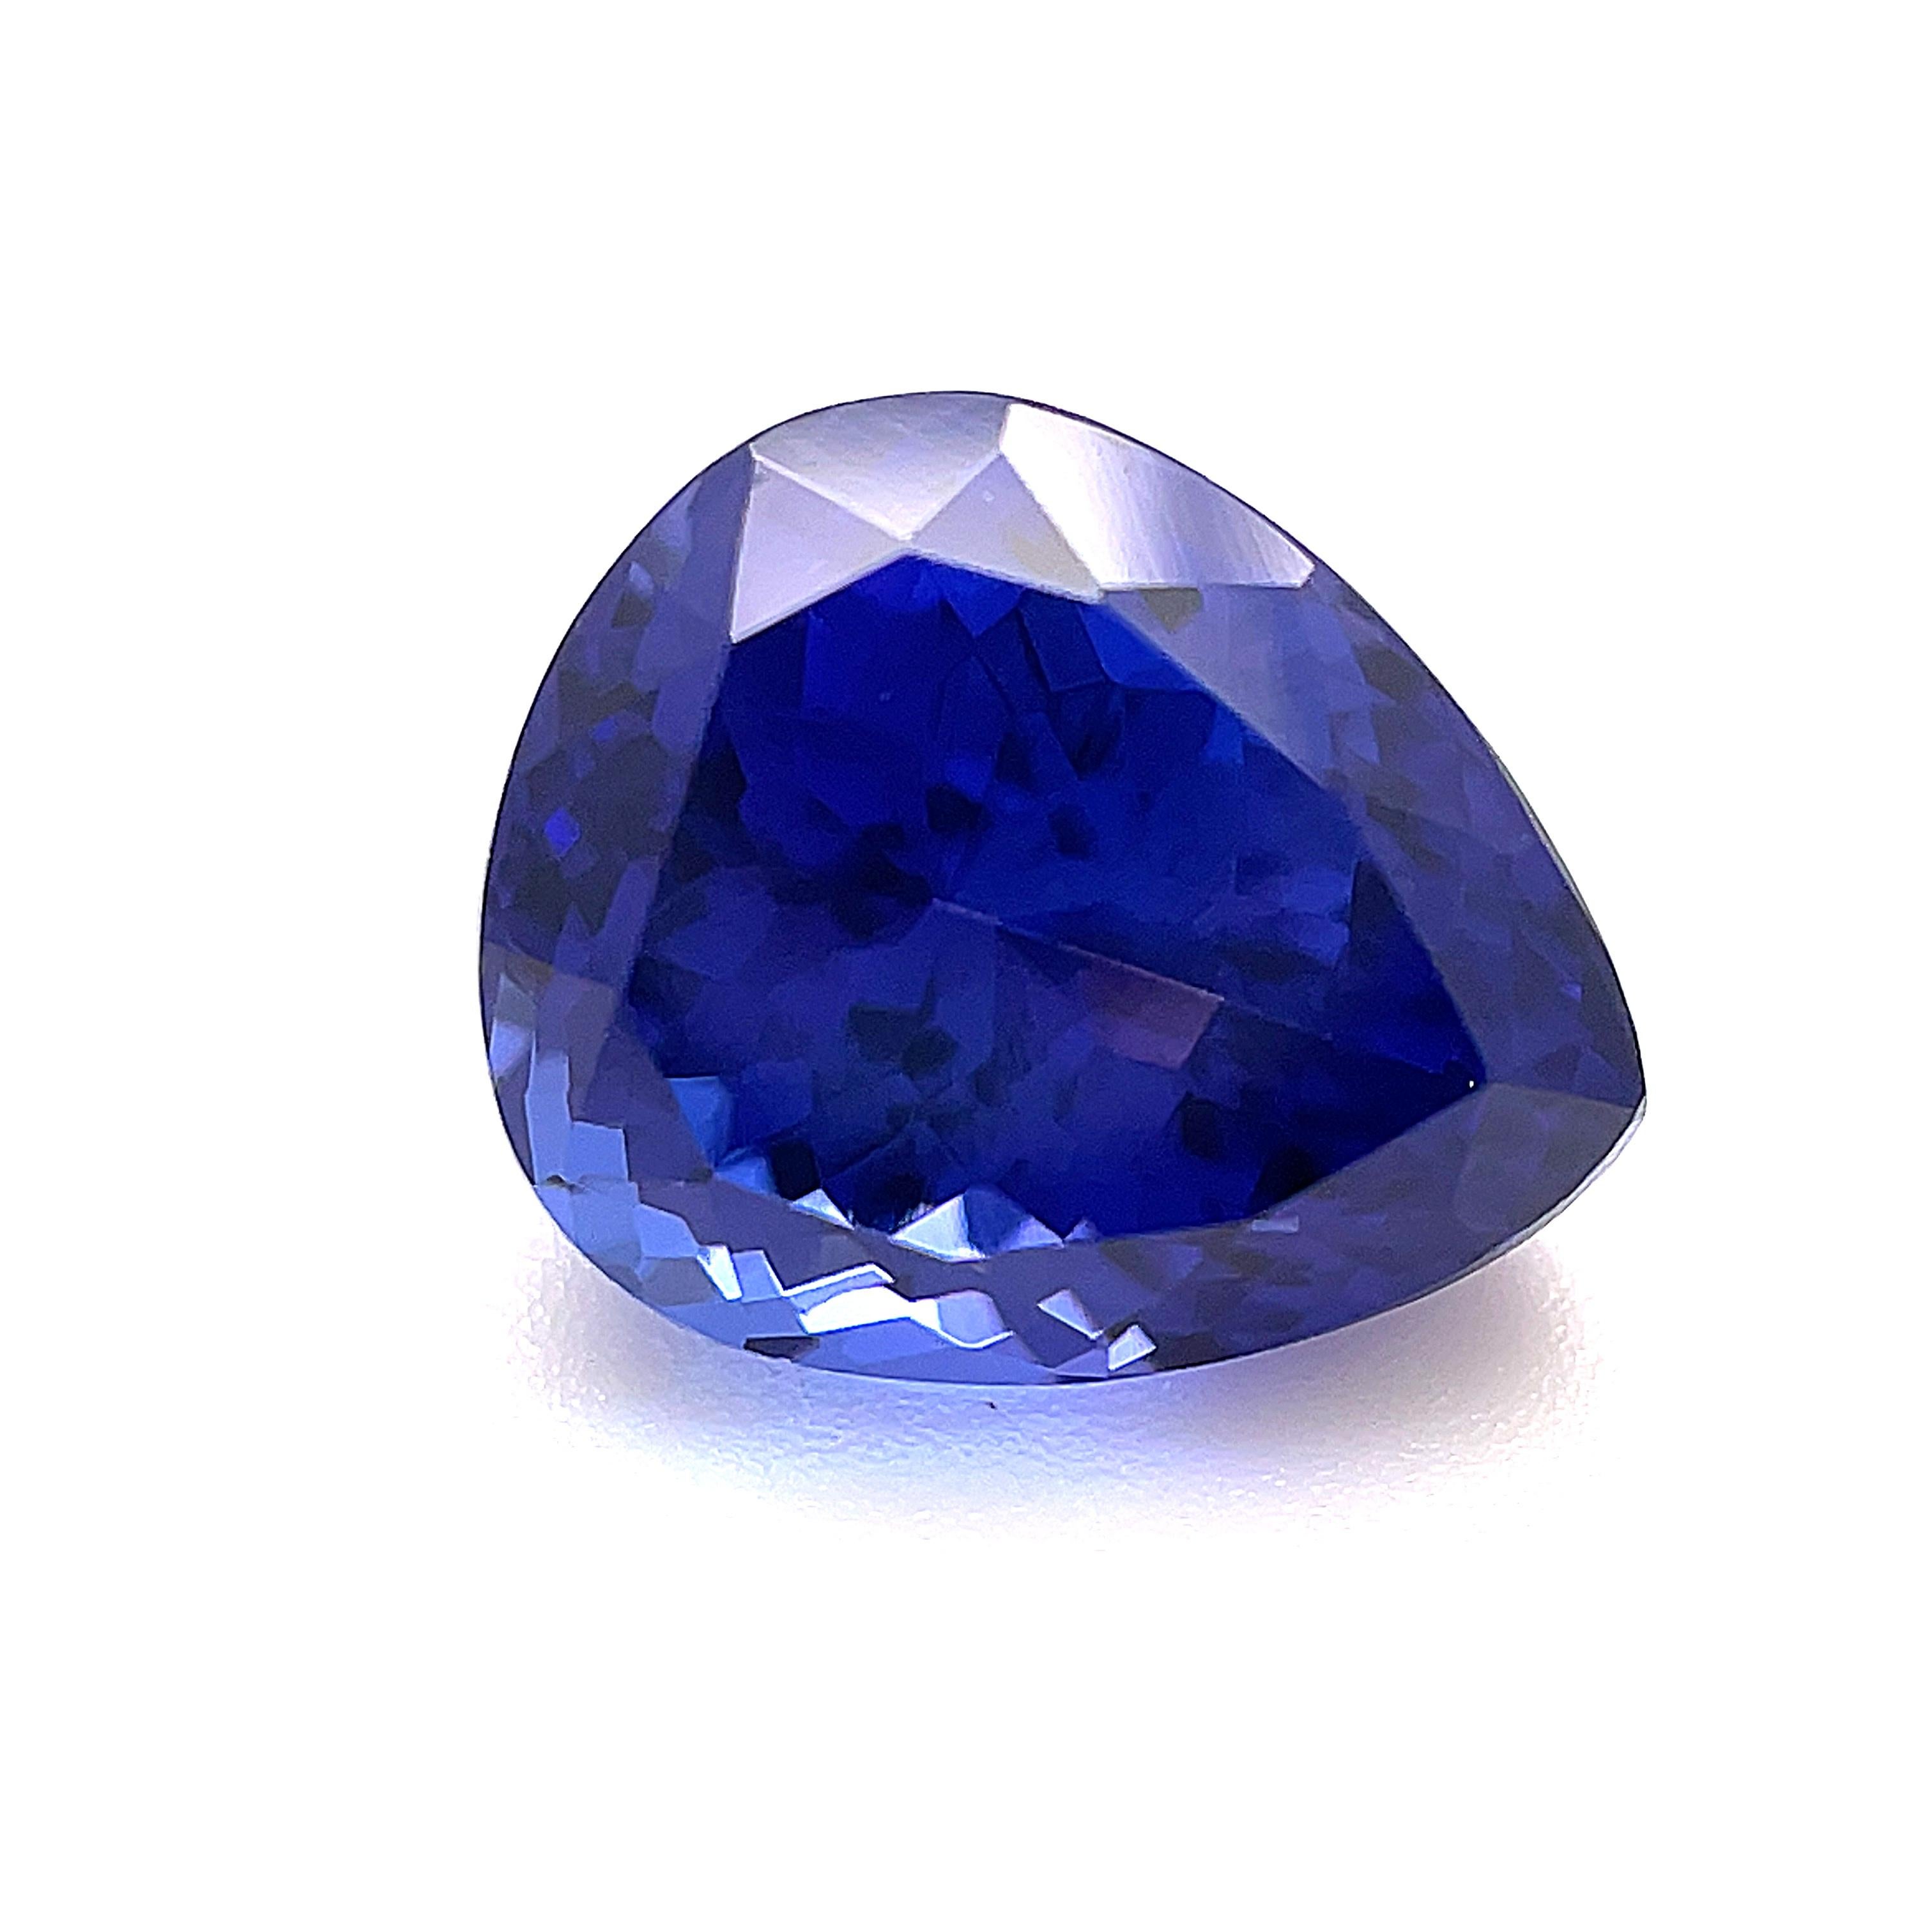 3.66 Carat Unset Loose Pear Shaped Unmounted Tanzanite Gemstone In New Condition For Sale In Los Angeles, CA